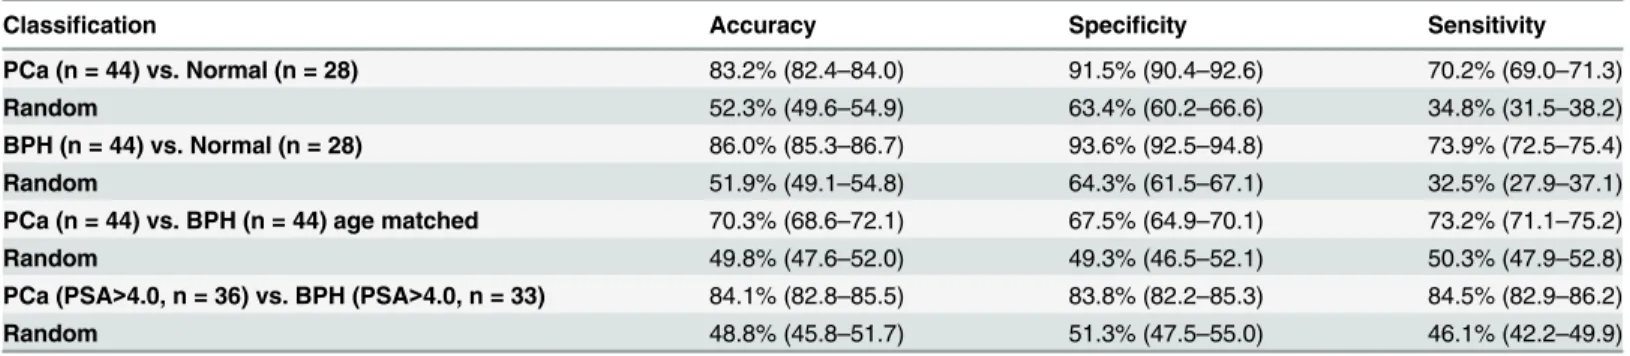 Table 3. Mean values of Accuracy, Specificity and Sensitivity for the classifications of PCa vs